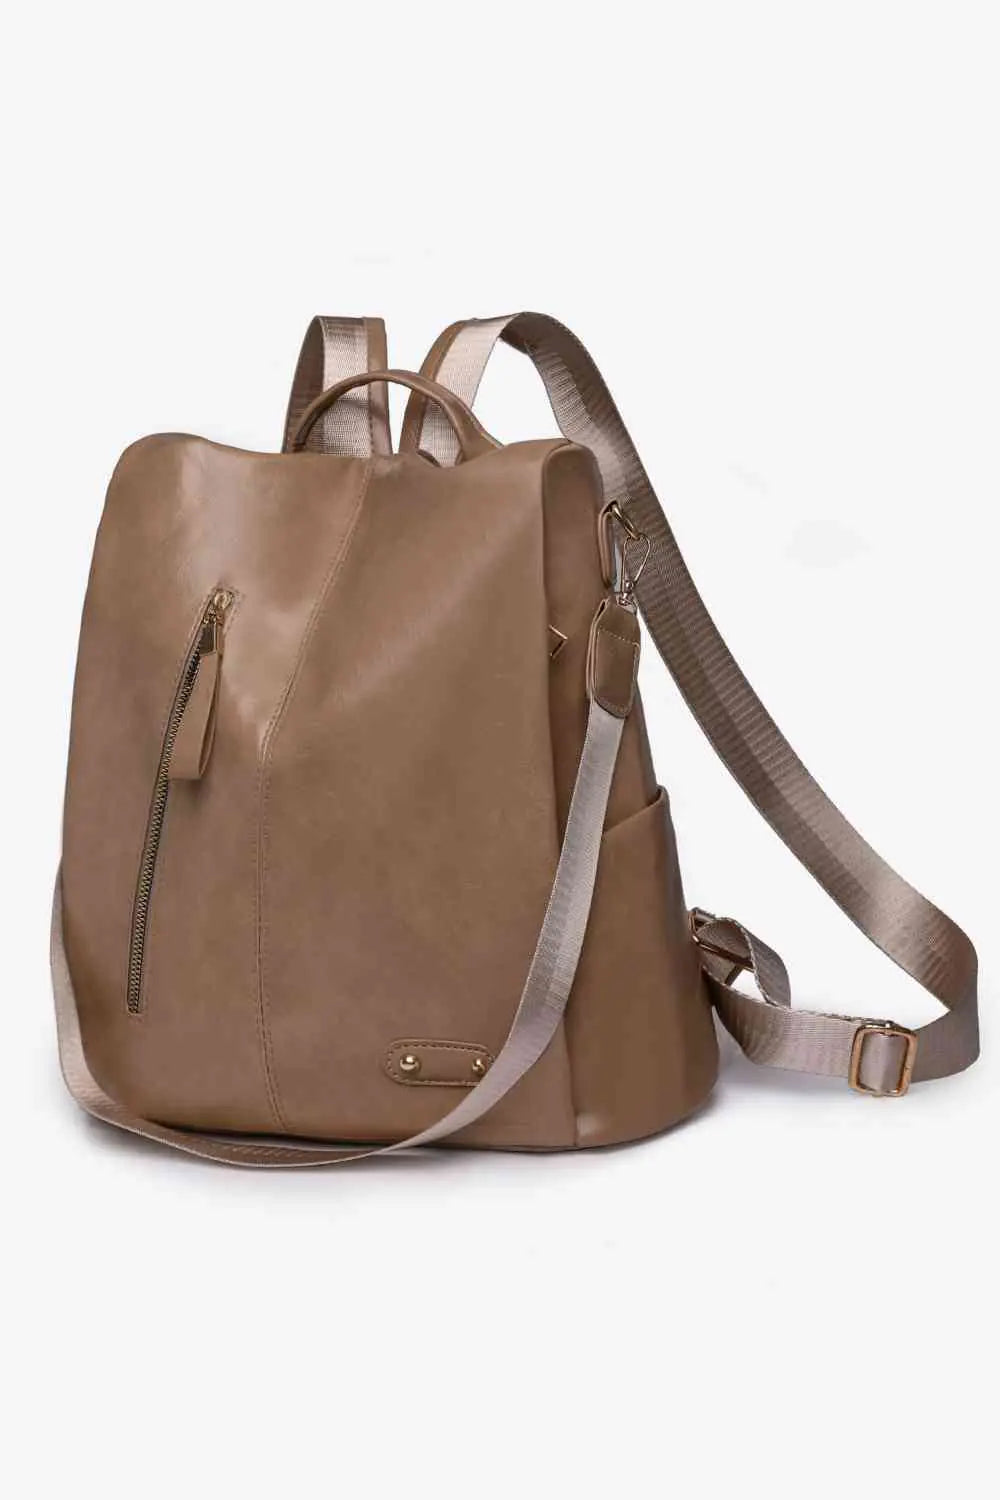 Backpack with a zipper pocket Marcy